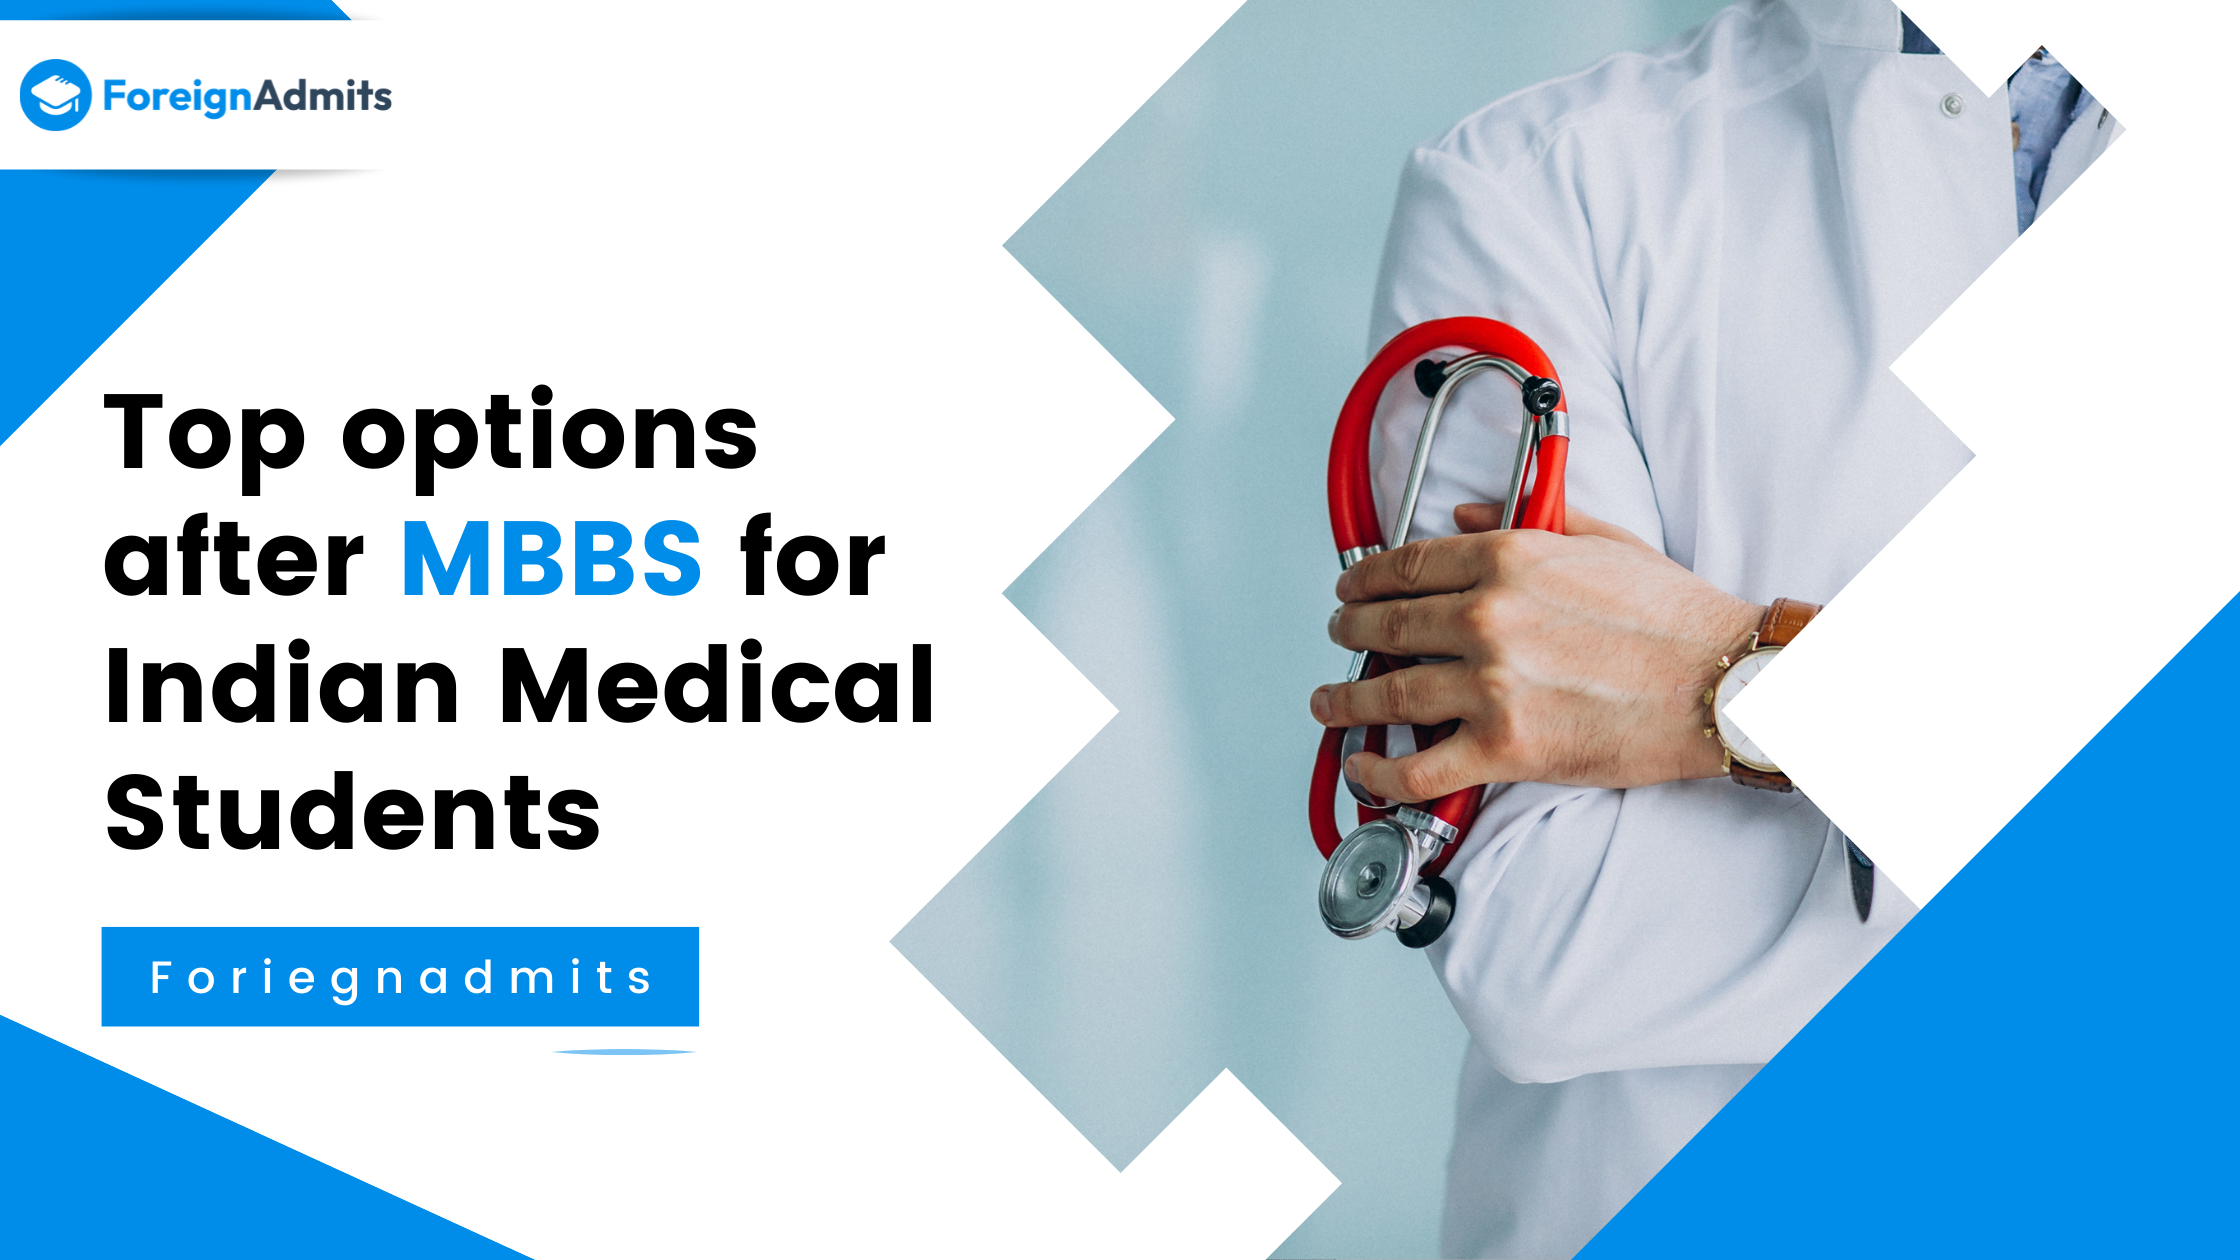 Top options after MBBS for Indian Medical Students